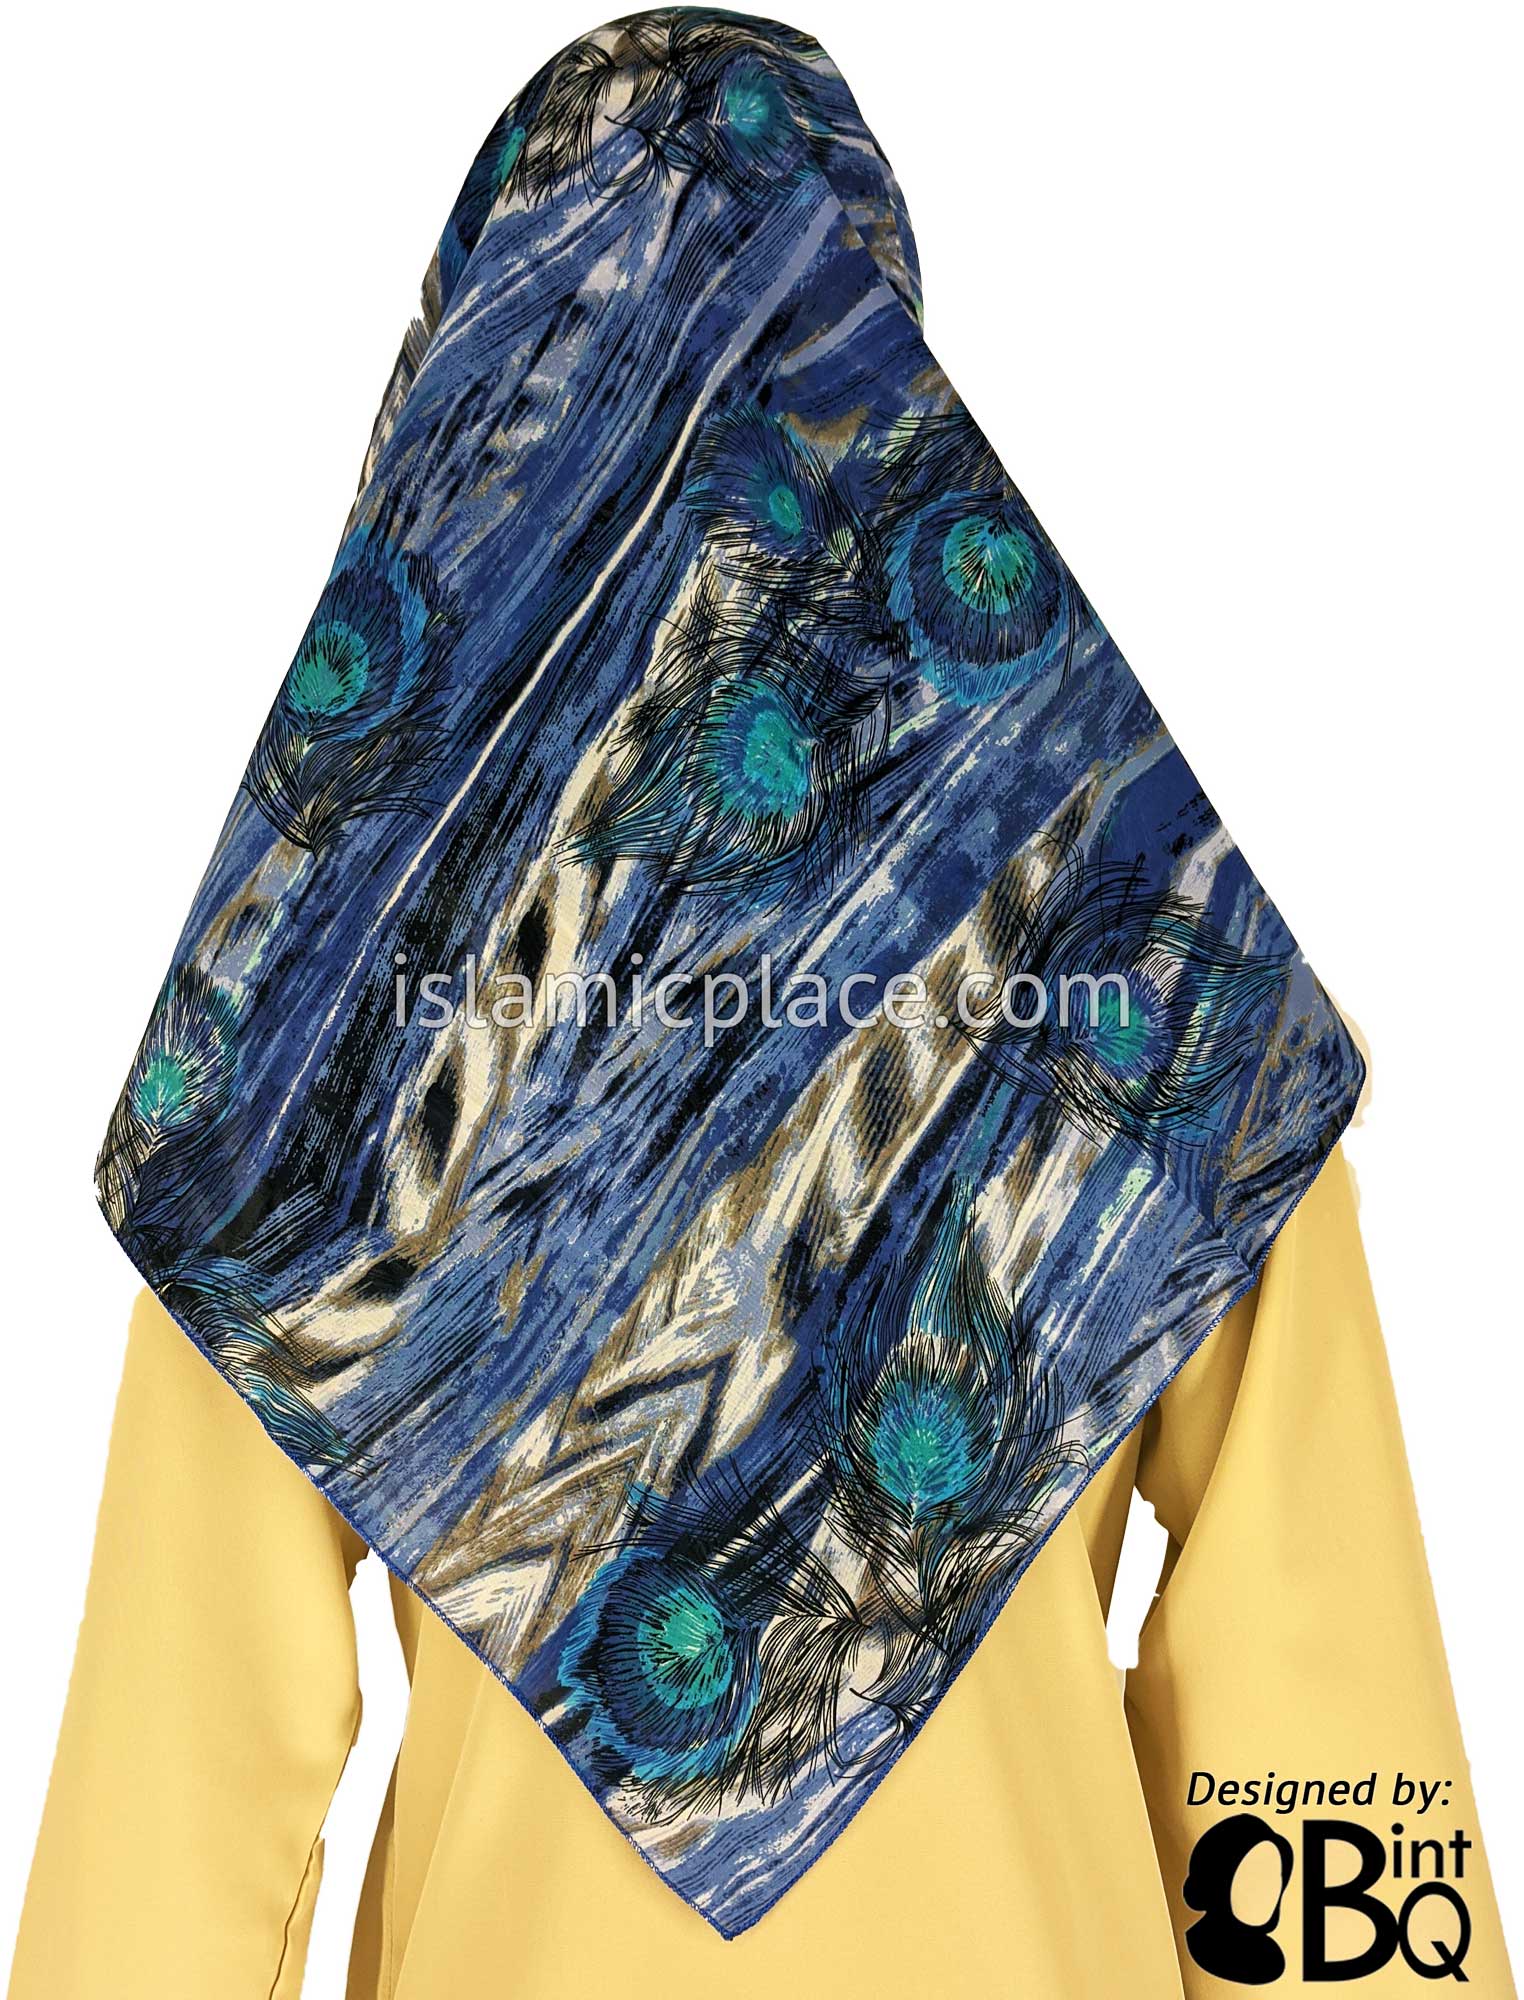 Blue and Turquoise Peacock Feathers in the Wind - 45" Square Printed Khimar